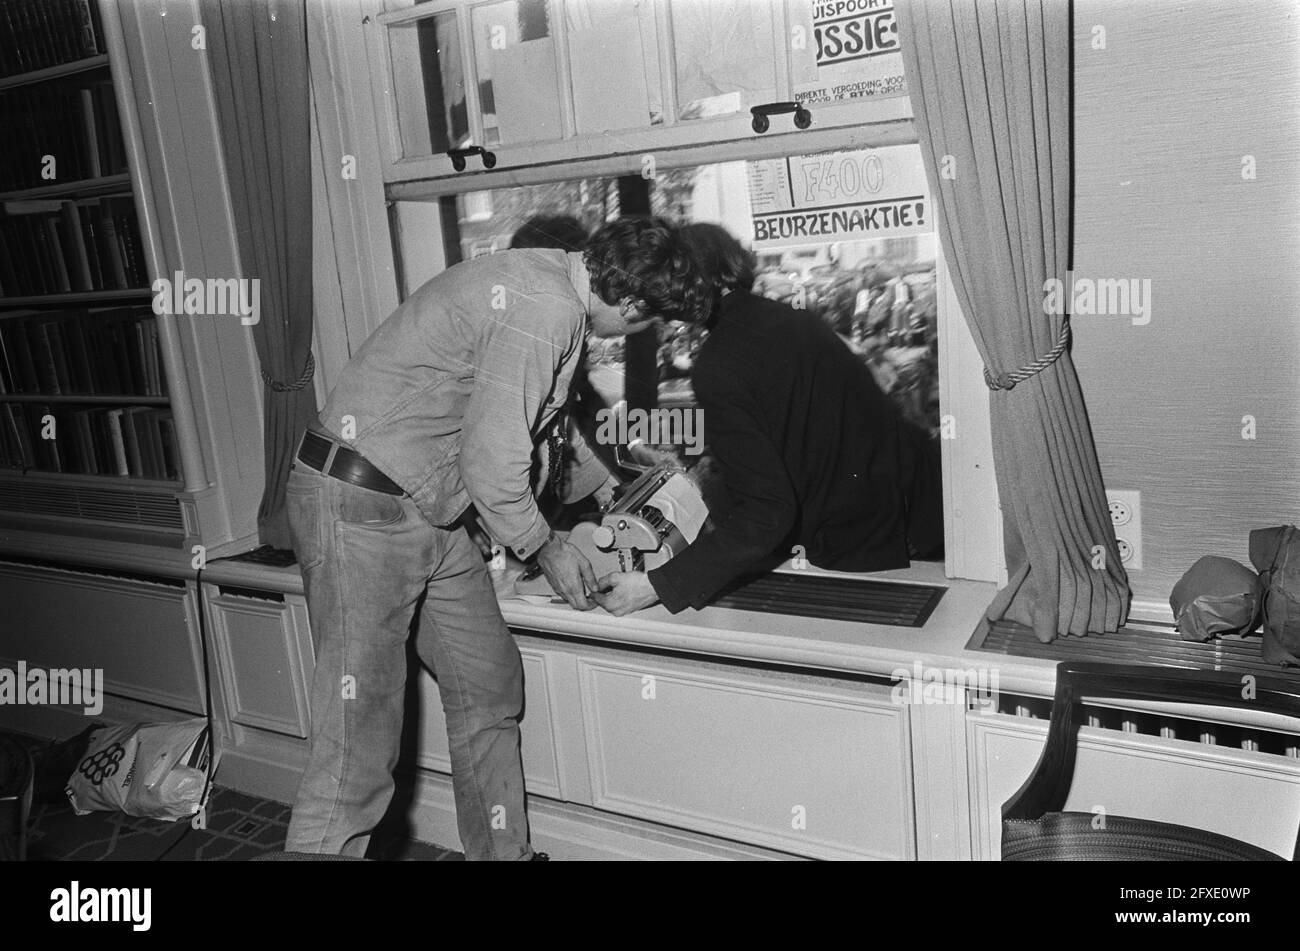 Students occupy Maagdenhuis in Amsterdam no. 14, occupiers discuss situation, no. 15, the window of the senate room acts as a door, May 12, 1969, STUDENTS, occupations, The Netherlands, 20th century press agency photo, news to remember, documentary, historic photography 1945-1990, visual stories, human history of the Twentieth Century, capturing moments in time Stock Photo